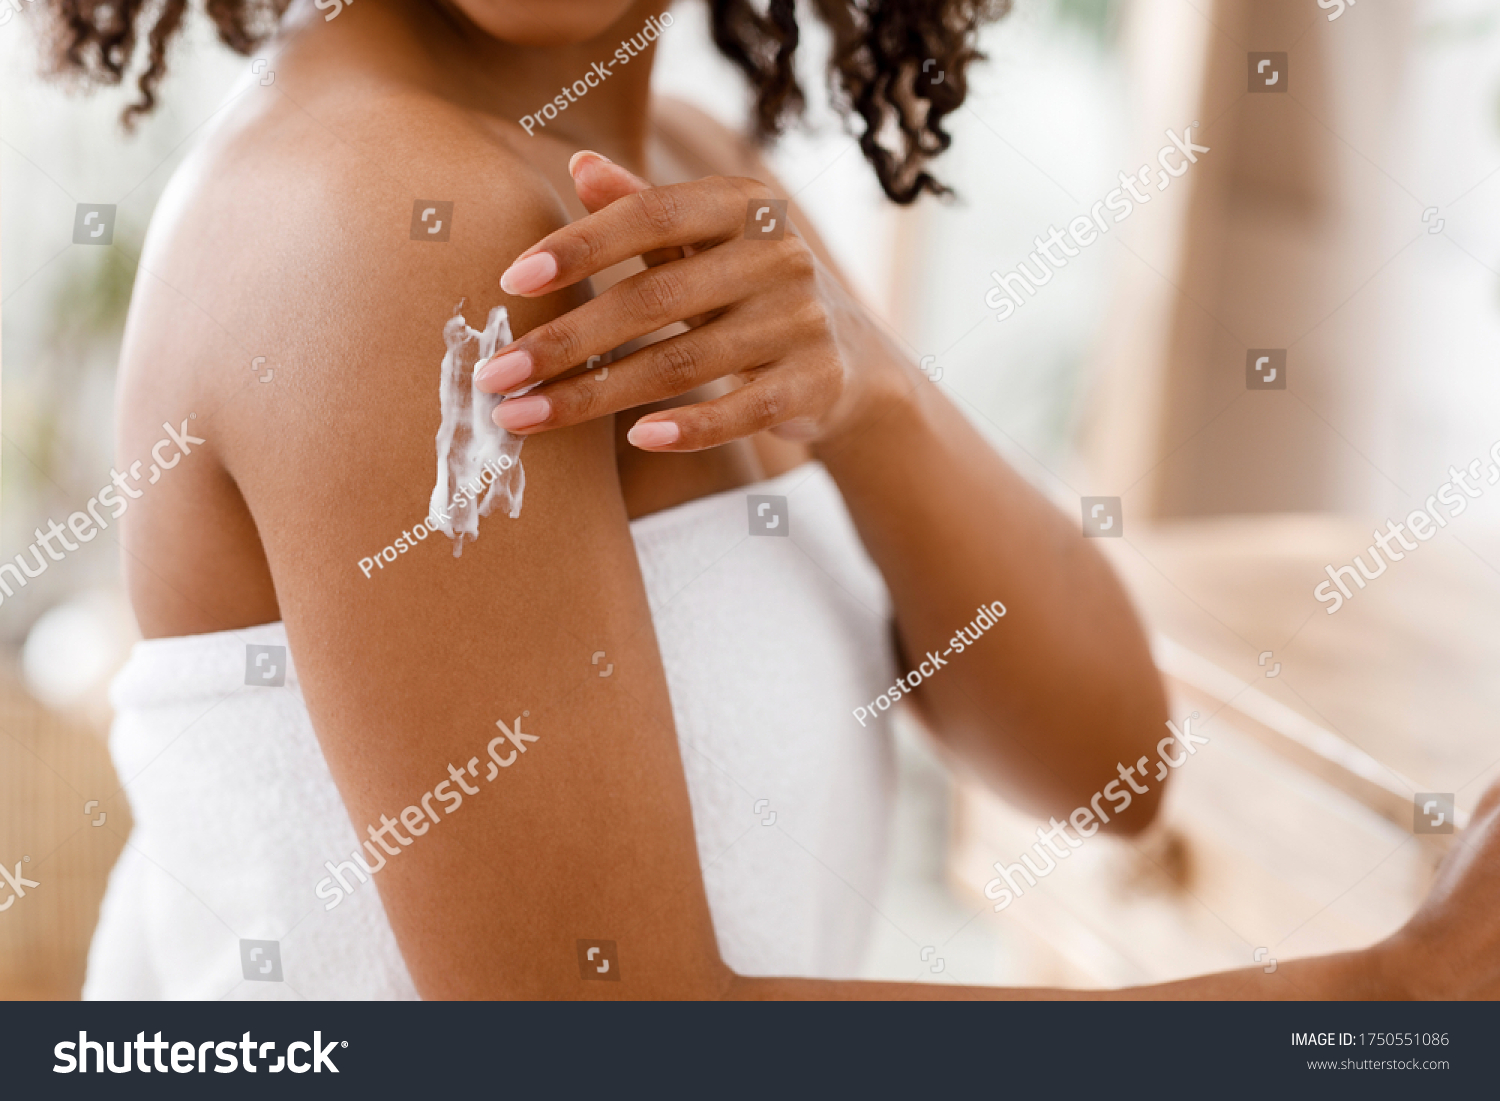 Skin Care Products Concept Black Woman Stock Photo Shutterstock